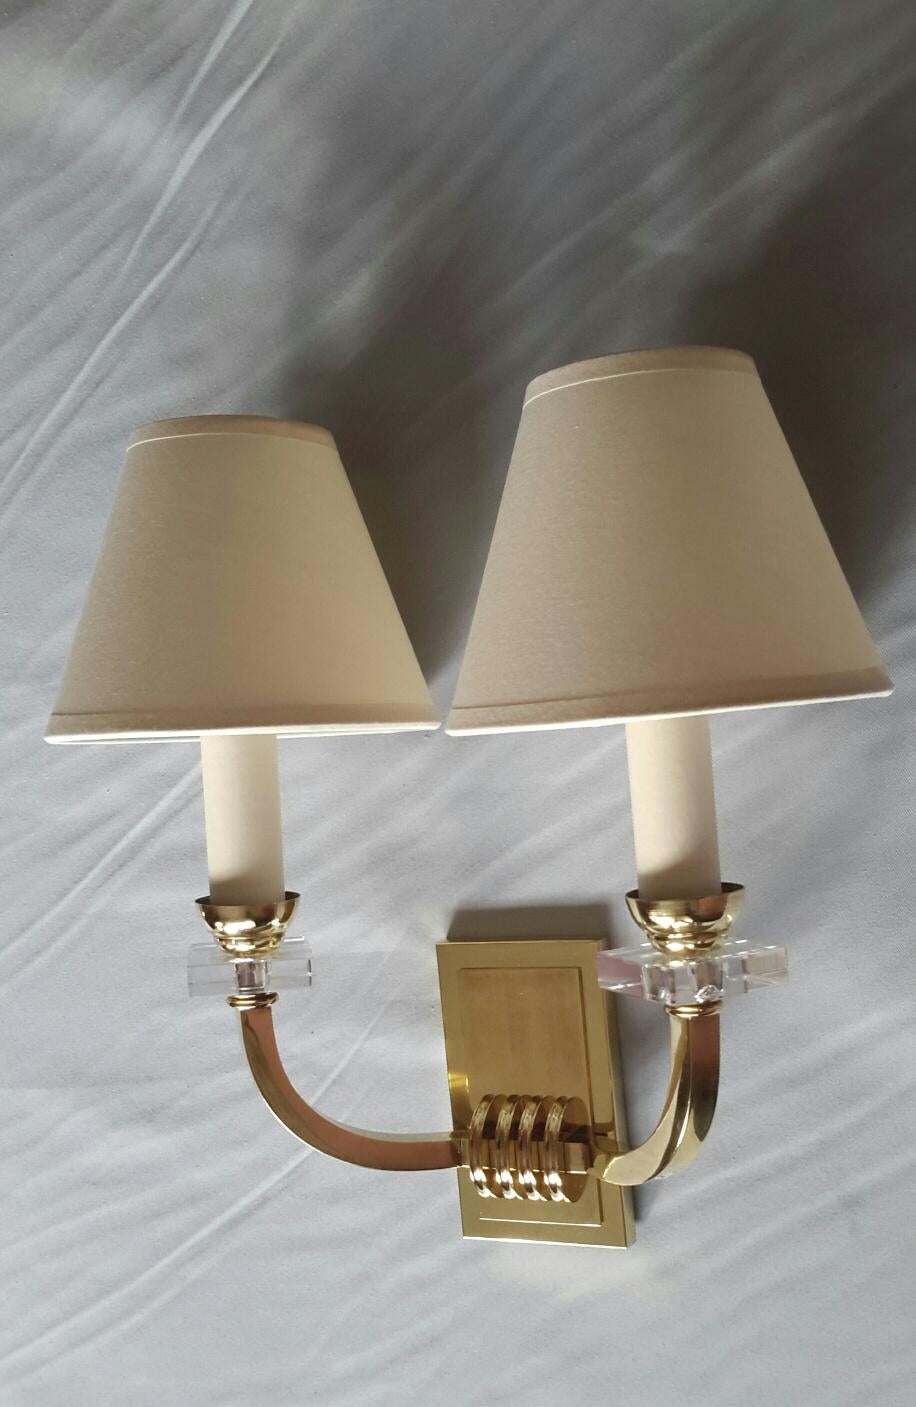 Gilt Jacques Adnet Neoclassical Wall Sconces, France, 1950 For Sale